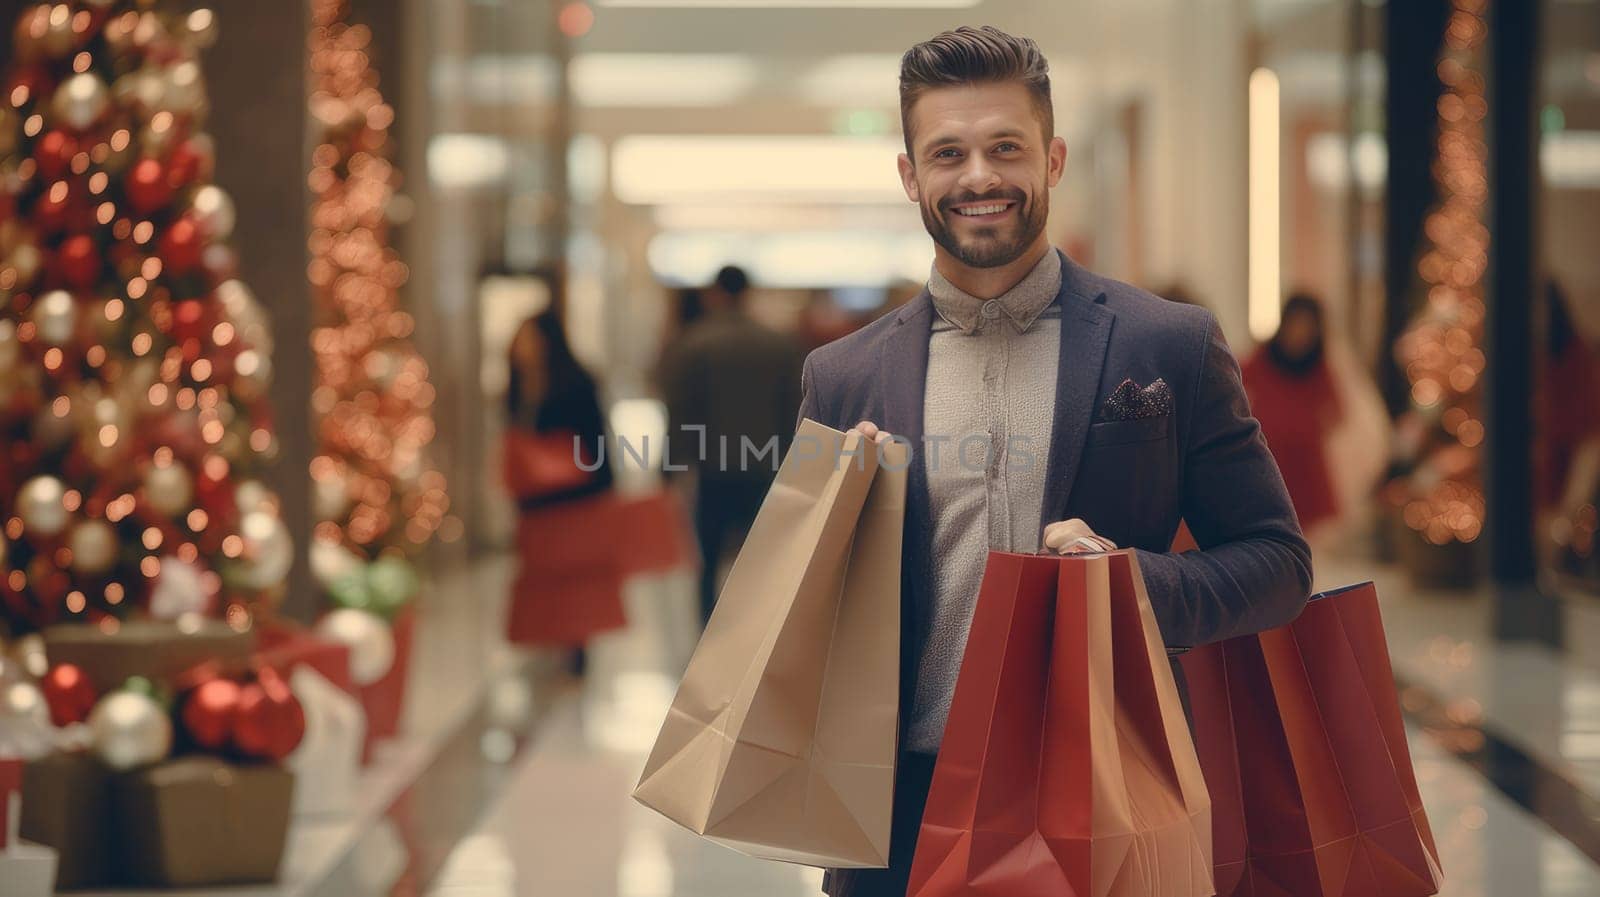 Smiling man with Christmas gifts in shopping bags in a shopping mall. Christmas sale concept.